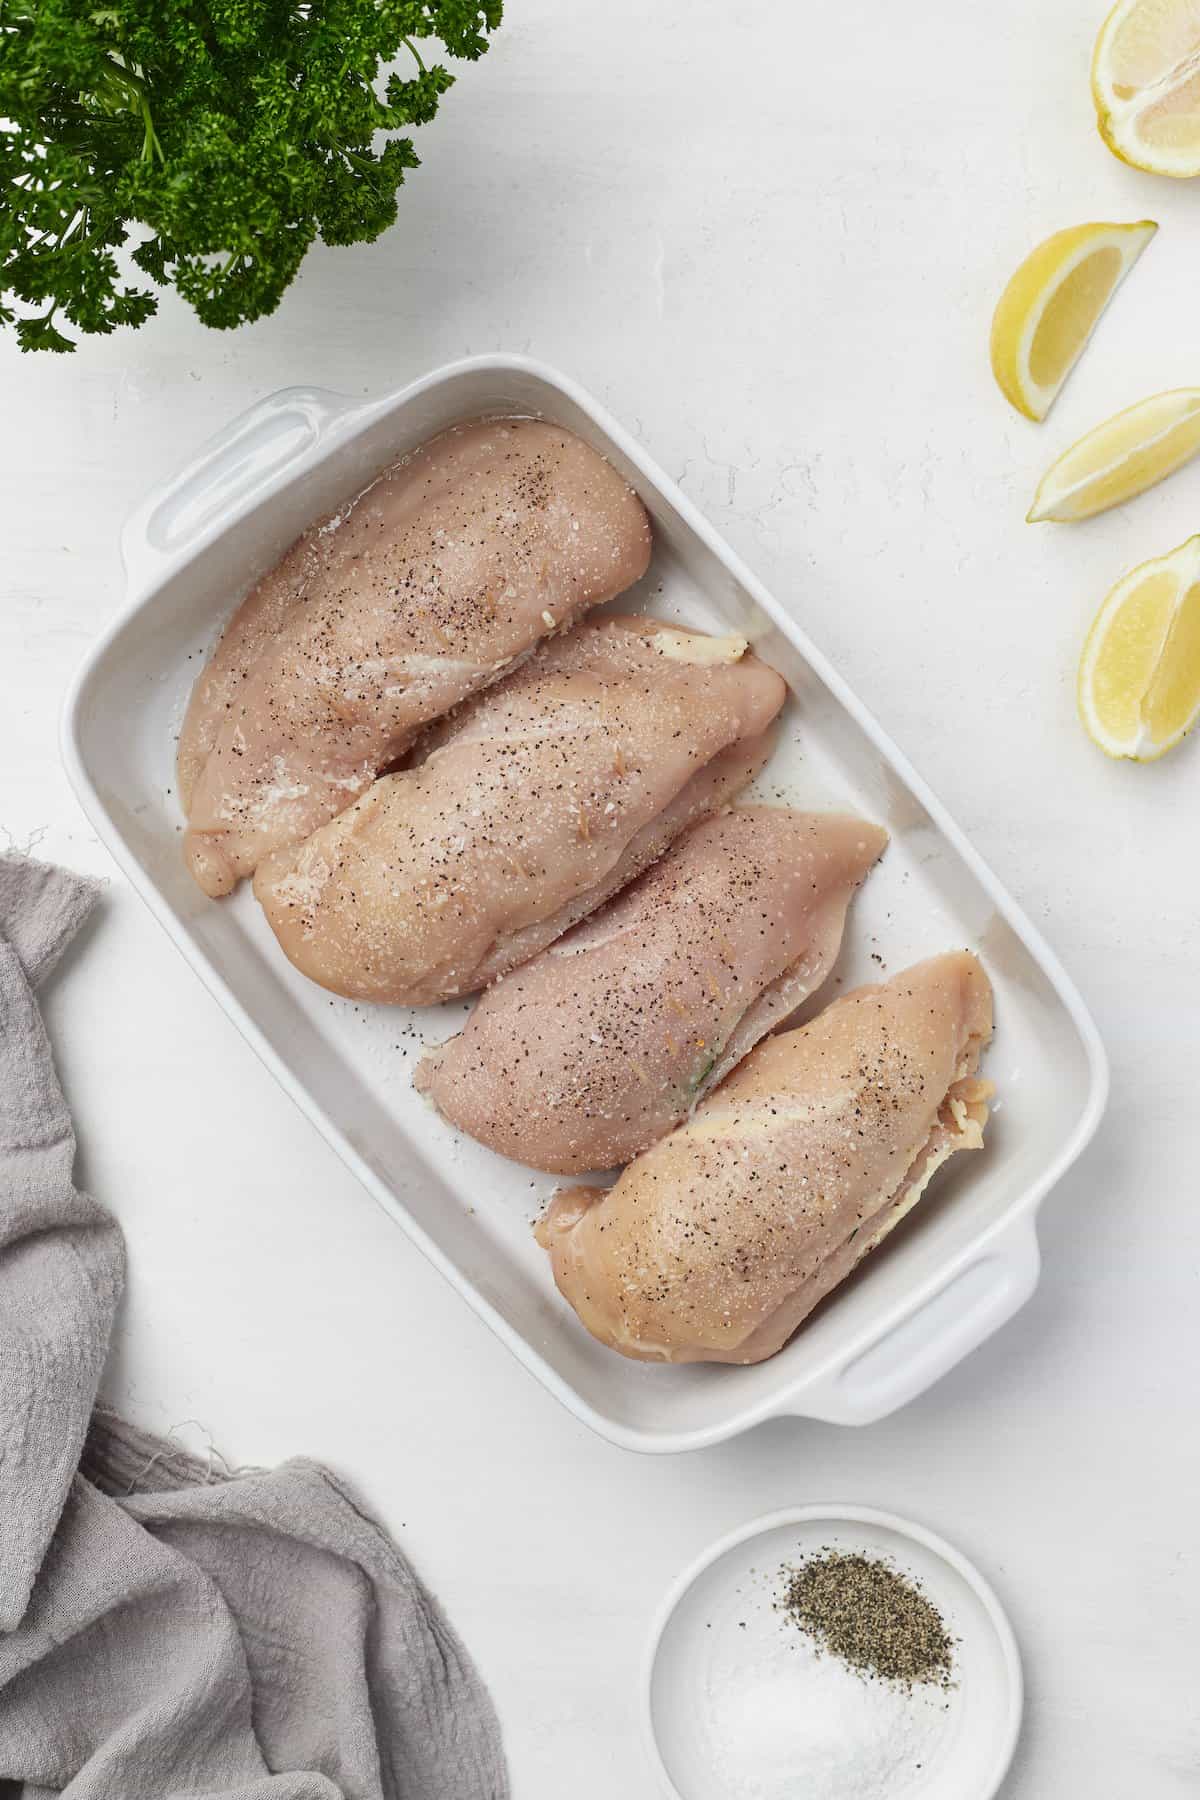 Four stuffed and seasoned chicken breasts in a baking dish with a plate of salt and pepper beside it